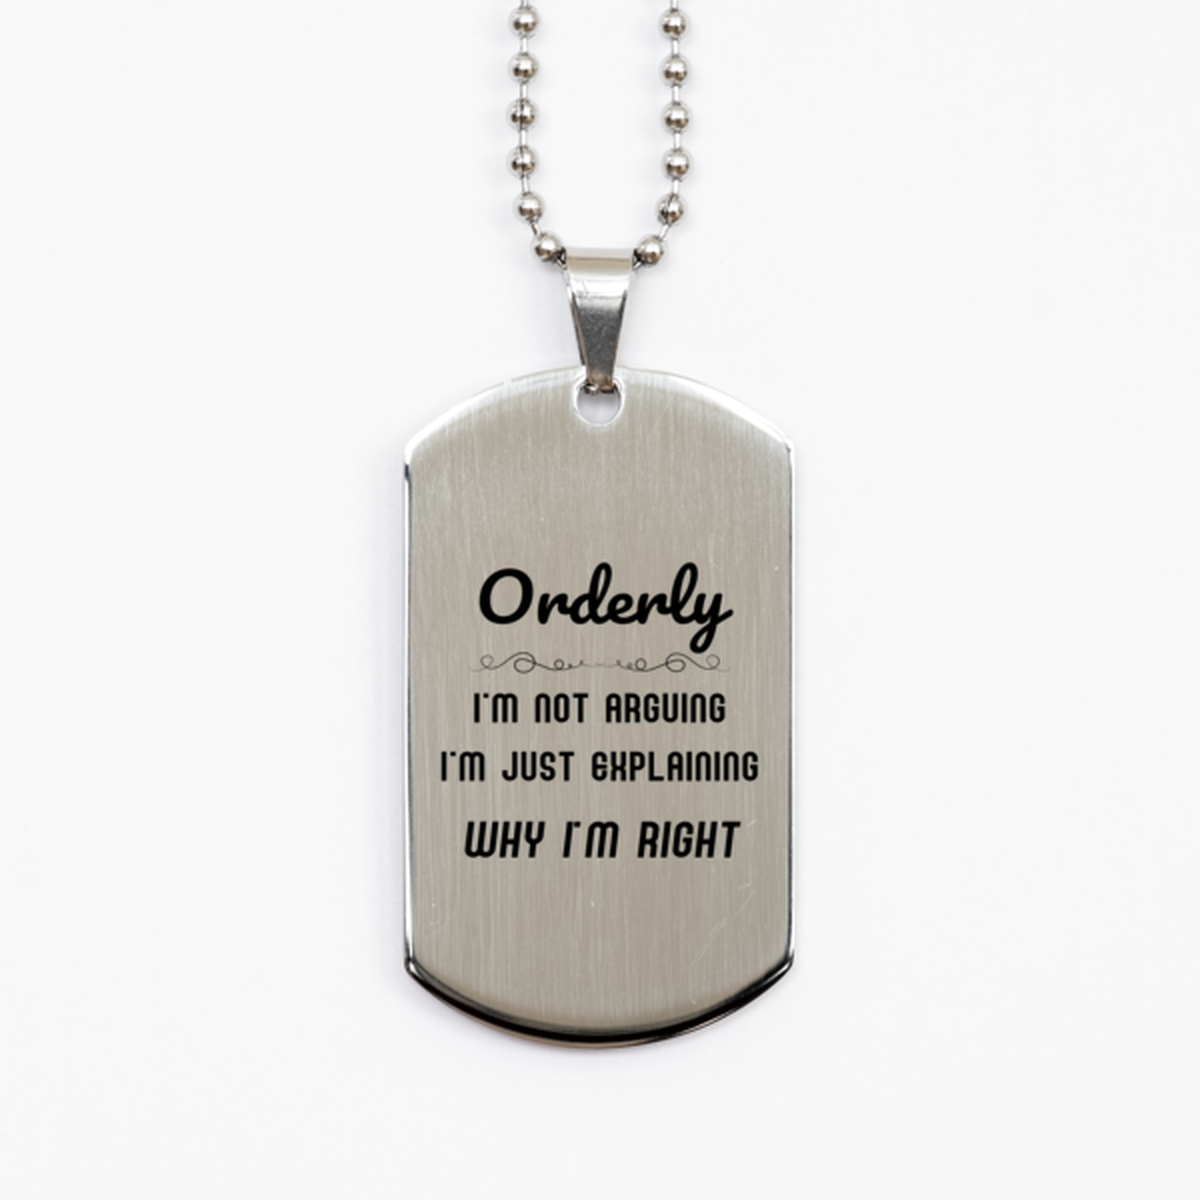 Orderly I'm not Arguing. I'm Just Explaining Why I'm RIGHT Silver Dog Tag, Funny Saying Quote Orderly Gifts For Orderly Graduation Birthday Christmas Gifts for Men Women Coworker